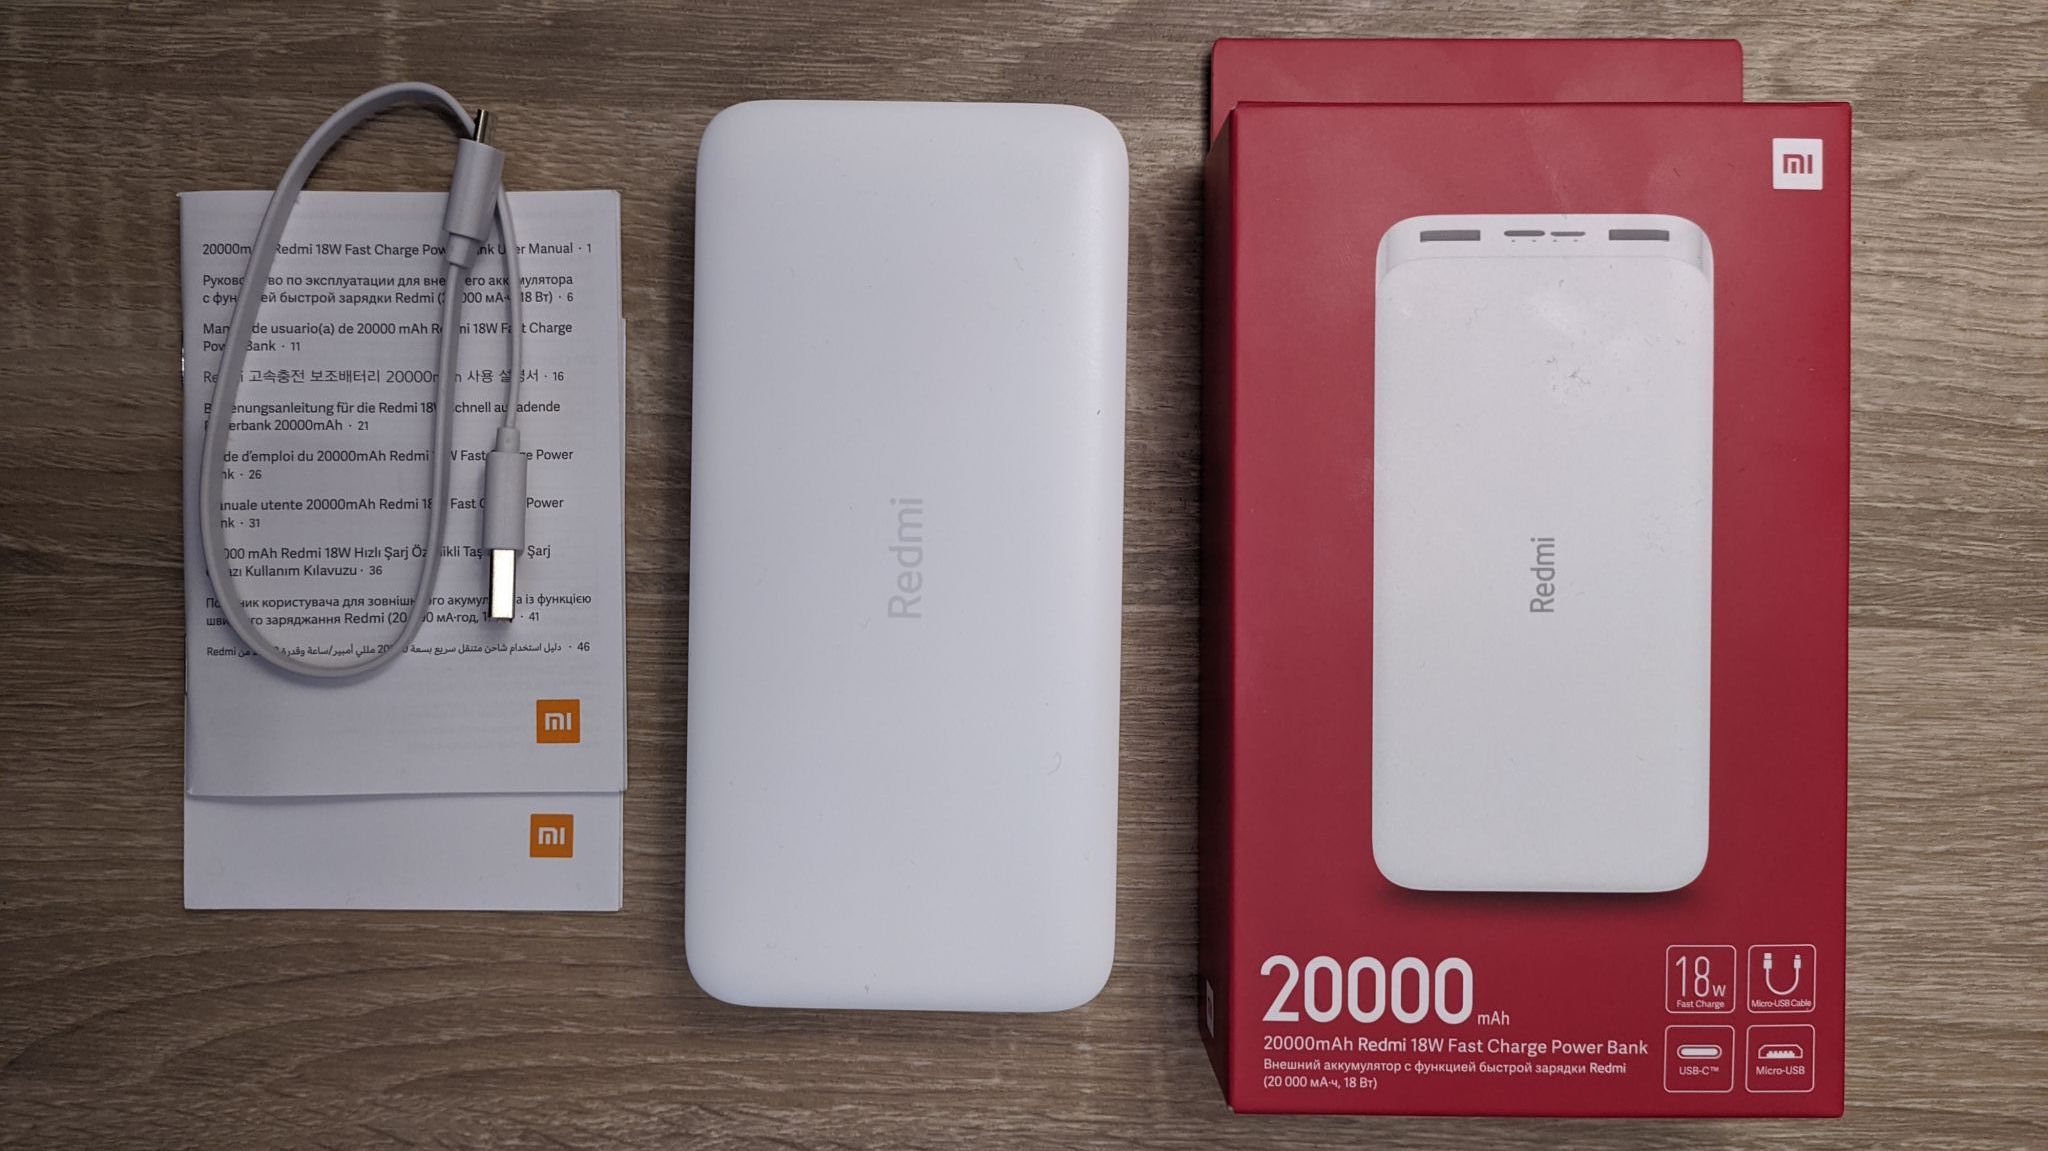 Xiaomi redmi fast charge power bank 20000. Повербанк 20000 Mah Xiaomi. Redmi Power Bank 20000mah. Xiaomi Redmi 18w 20000mah. Power Bank mi 20000 18w.